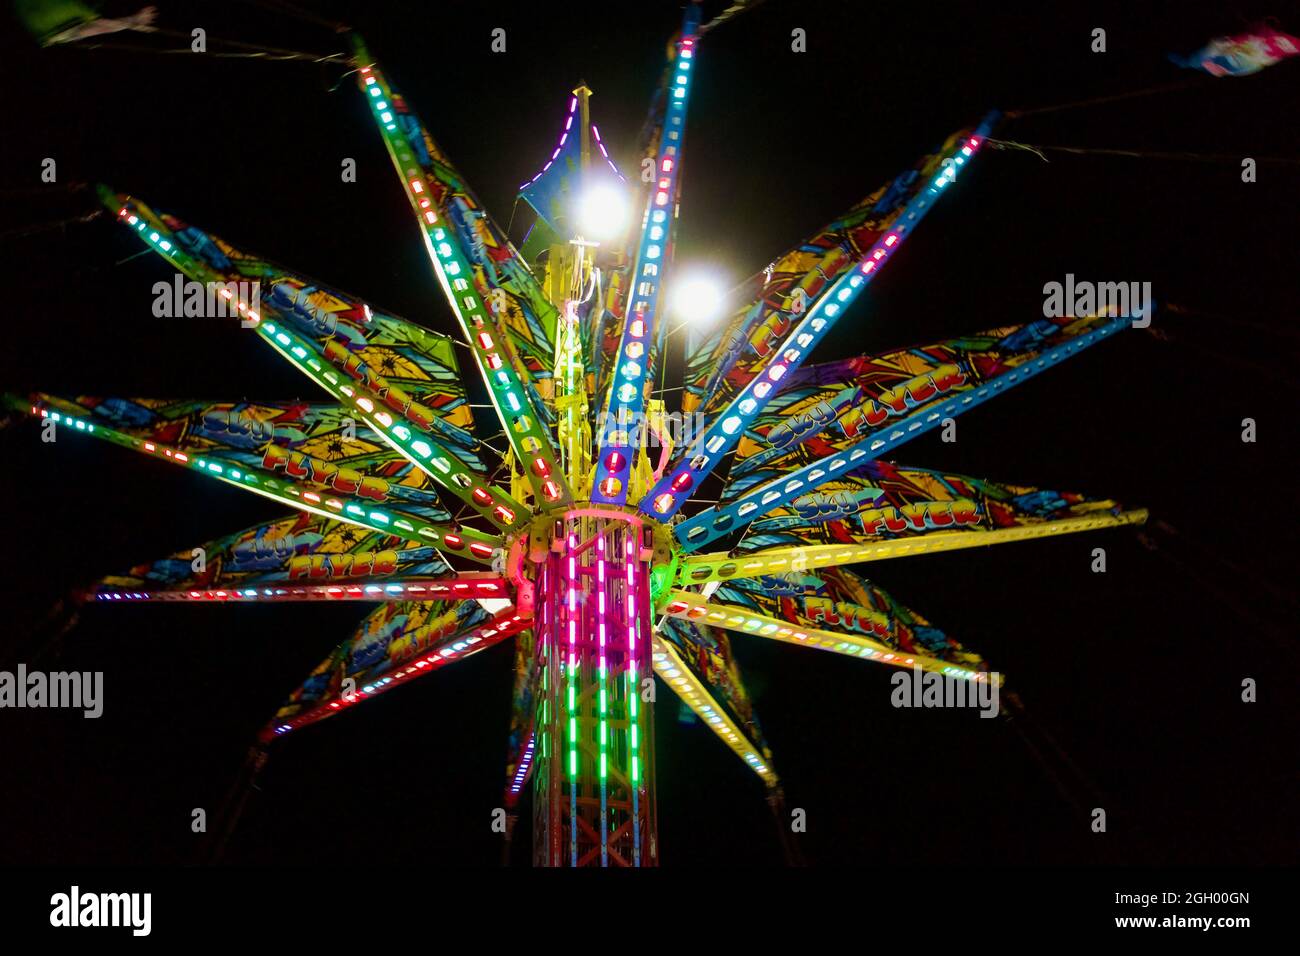 Sky Flyer swing ride on the Midway at night at the 2021 Minnesota State Fair, St. Paul, Minnesota. Stock Photo